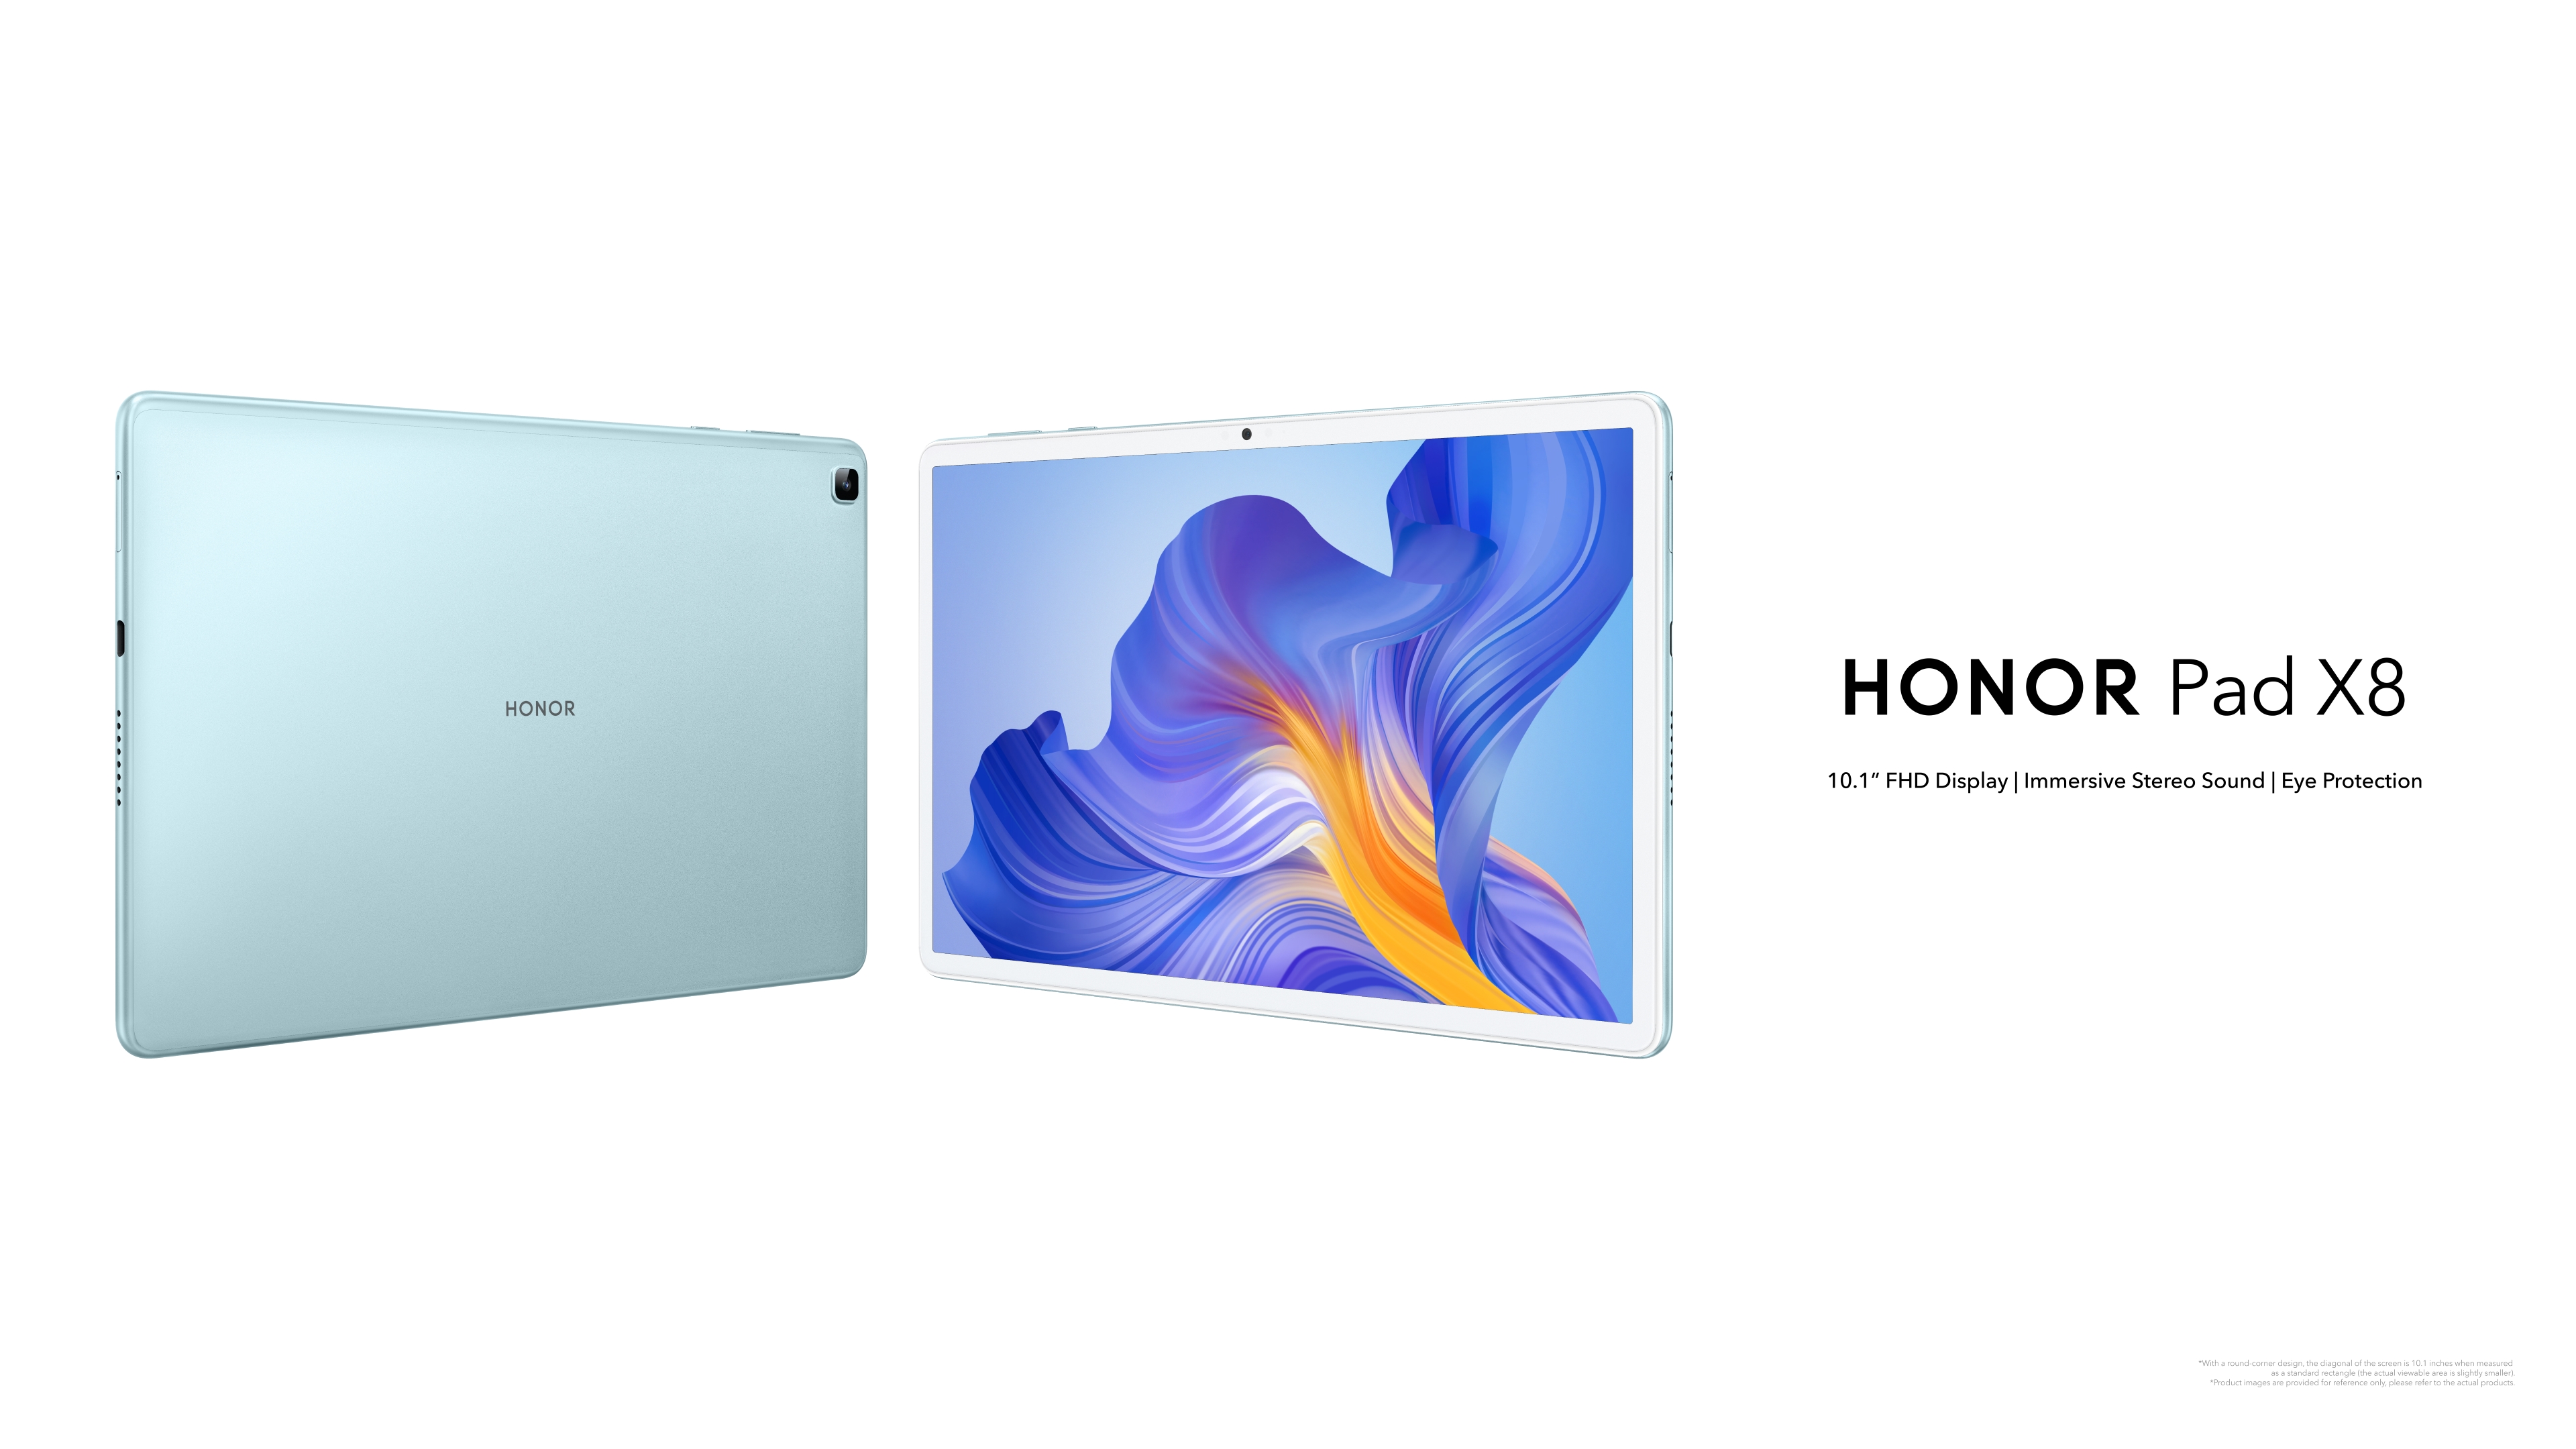 https://www.hihonor.com/content/dam/honor/uk/products/tablets/honor-pad-x8/imgs/honorpadx8-kv-pc.jpg